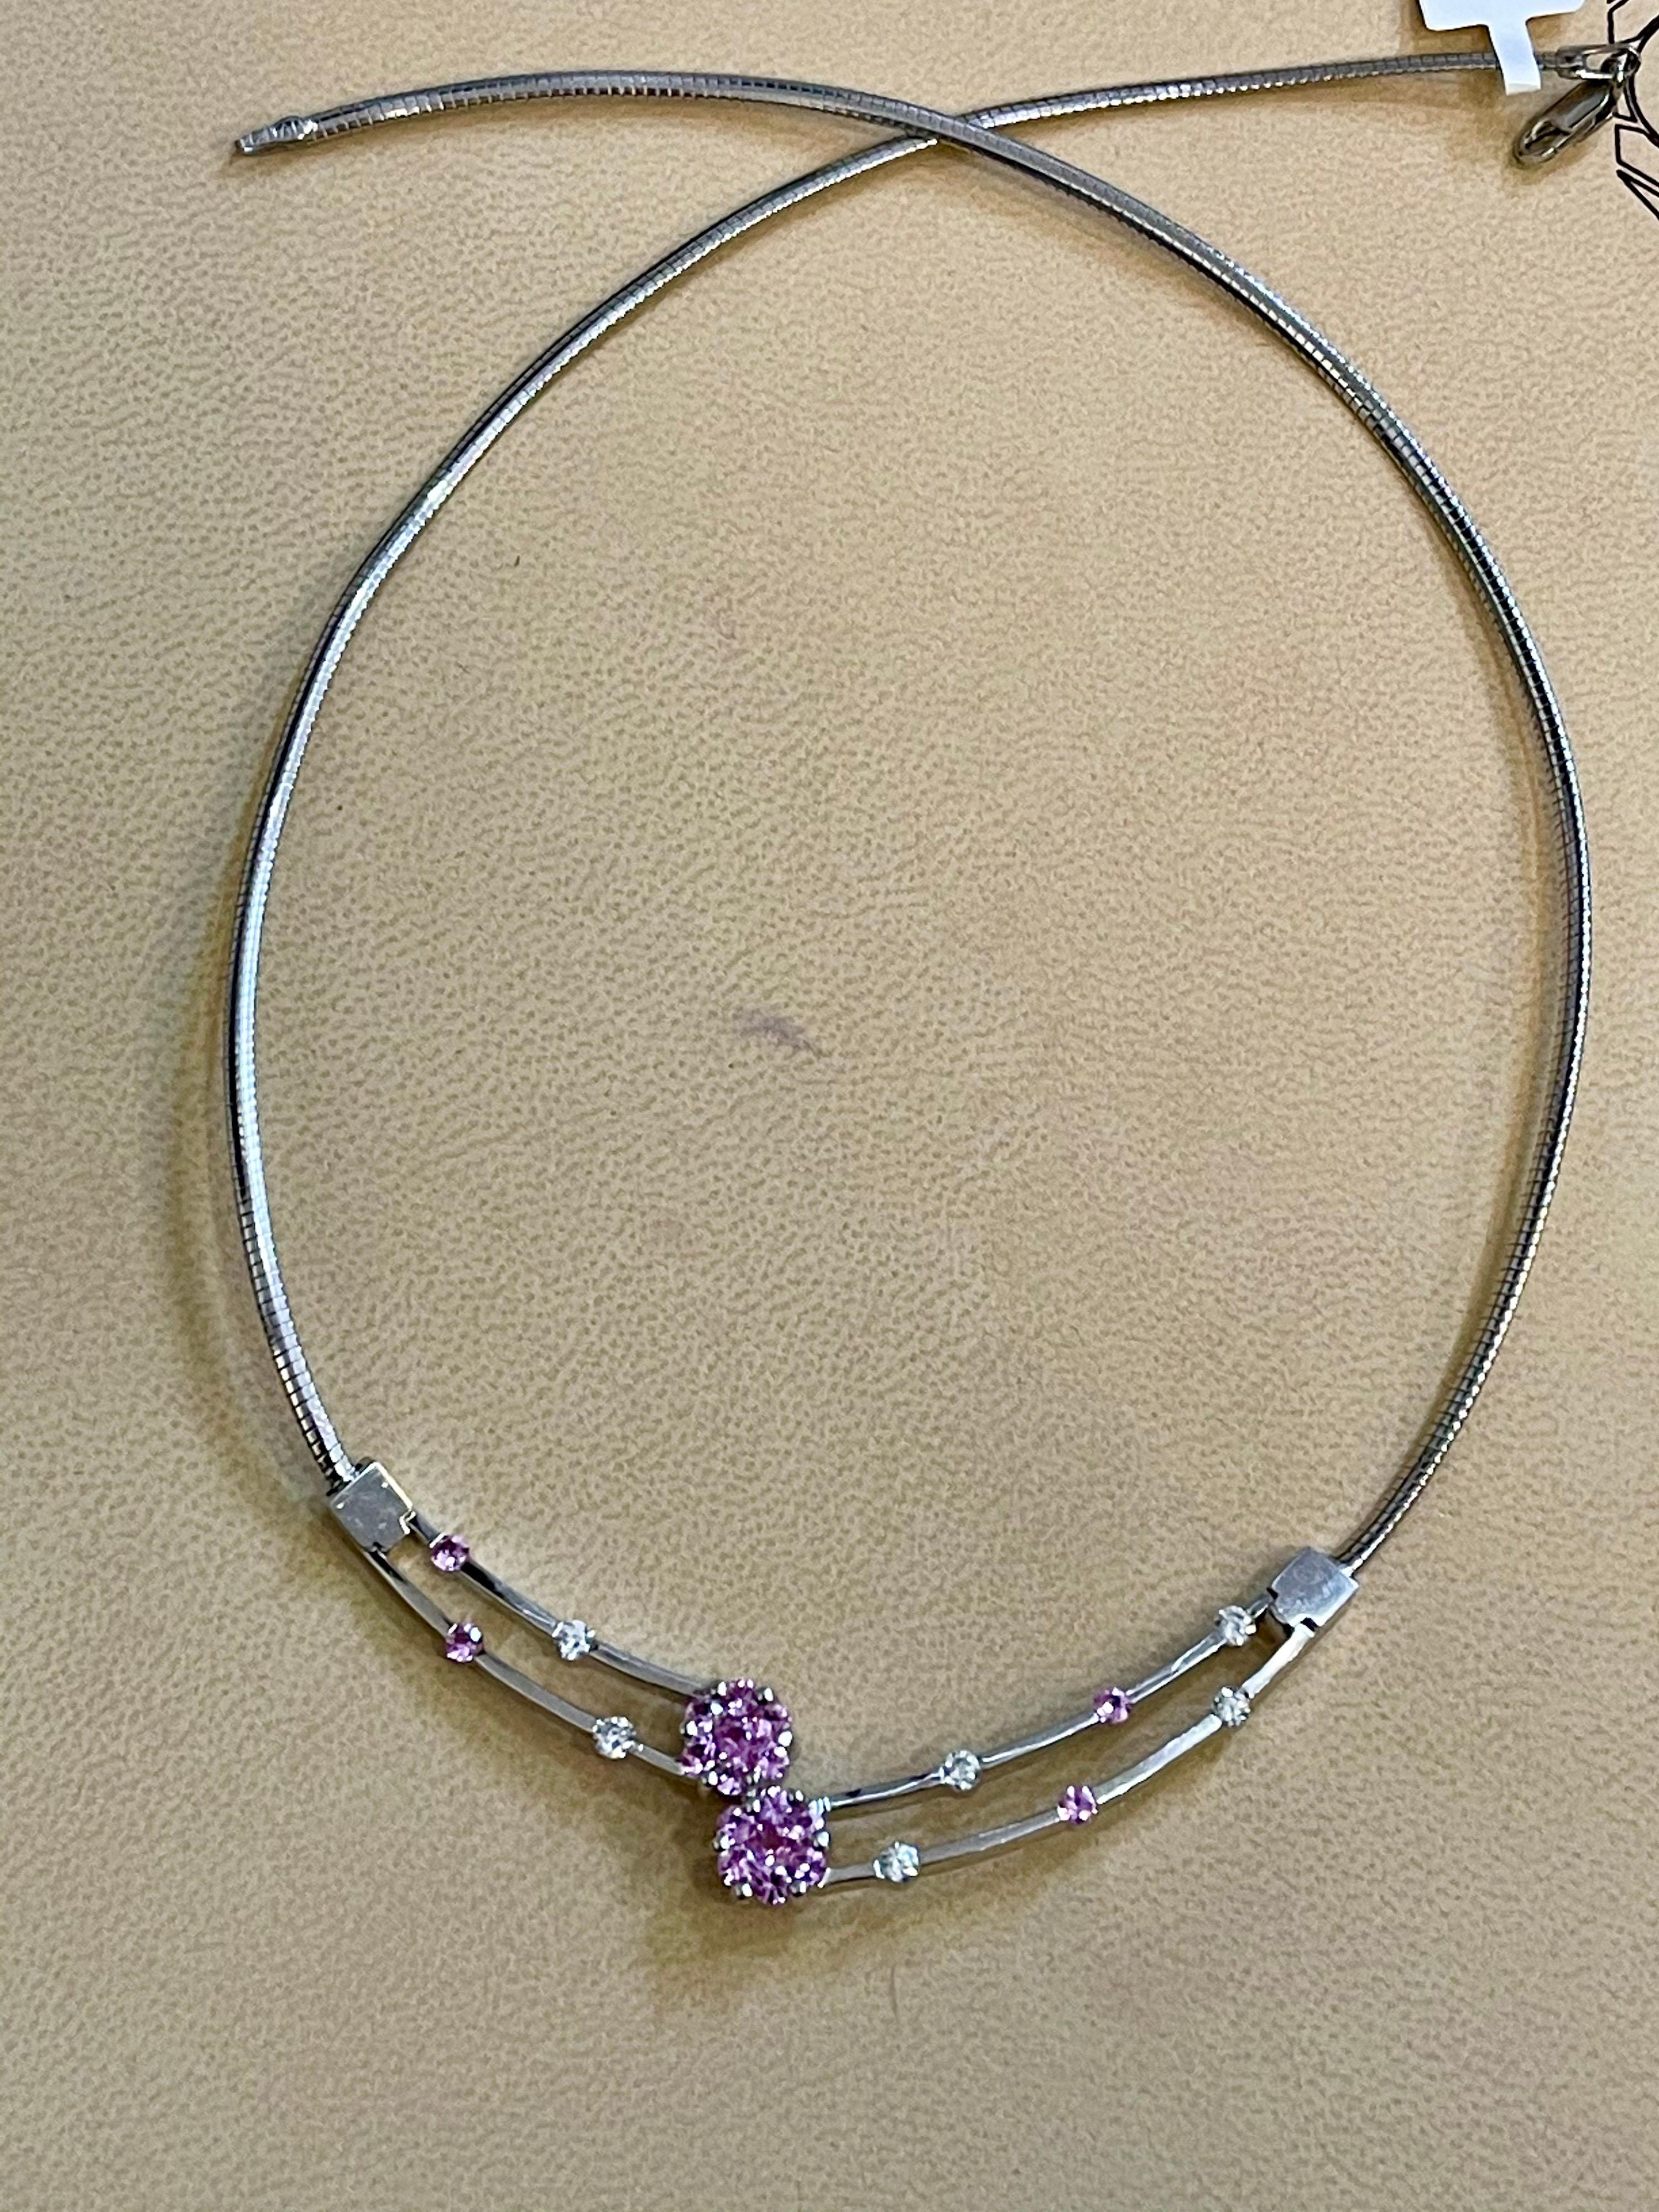 14 Karat White Gold Omega Necklace With Pink Sapphire & Diamonds, Italy, 16 